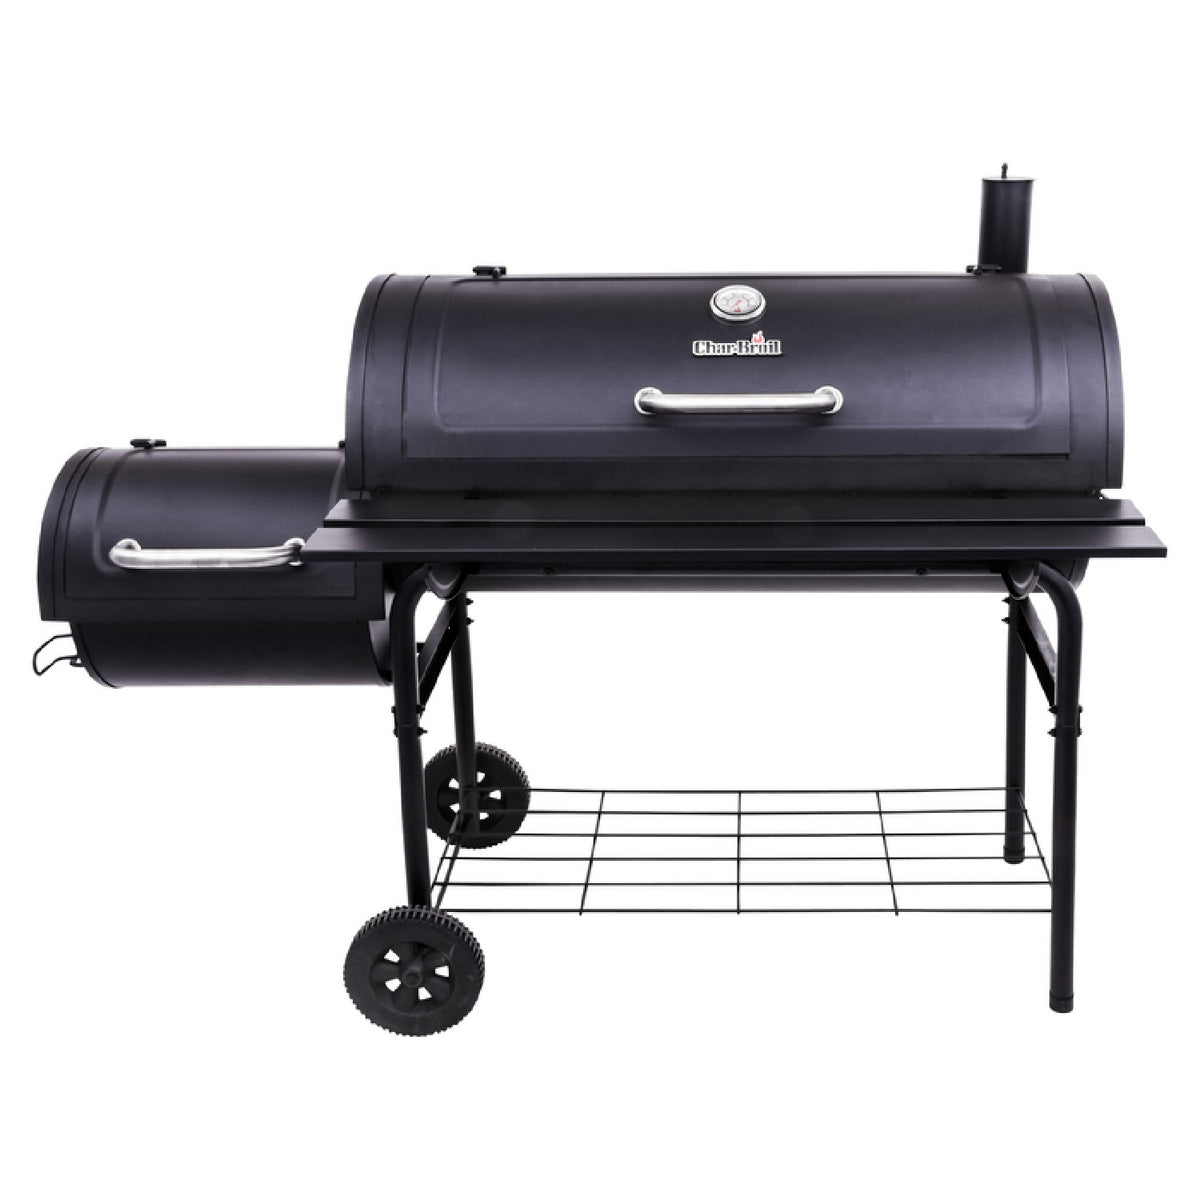 Char-Broil 18202080 Deluxe Charcoal Offset Smoker, Black